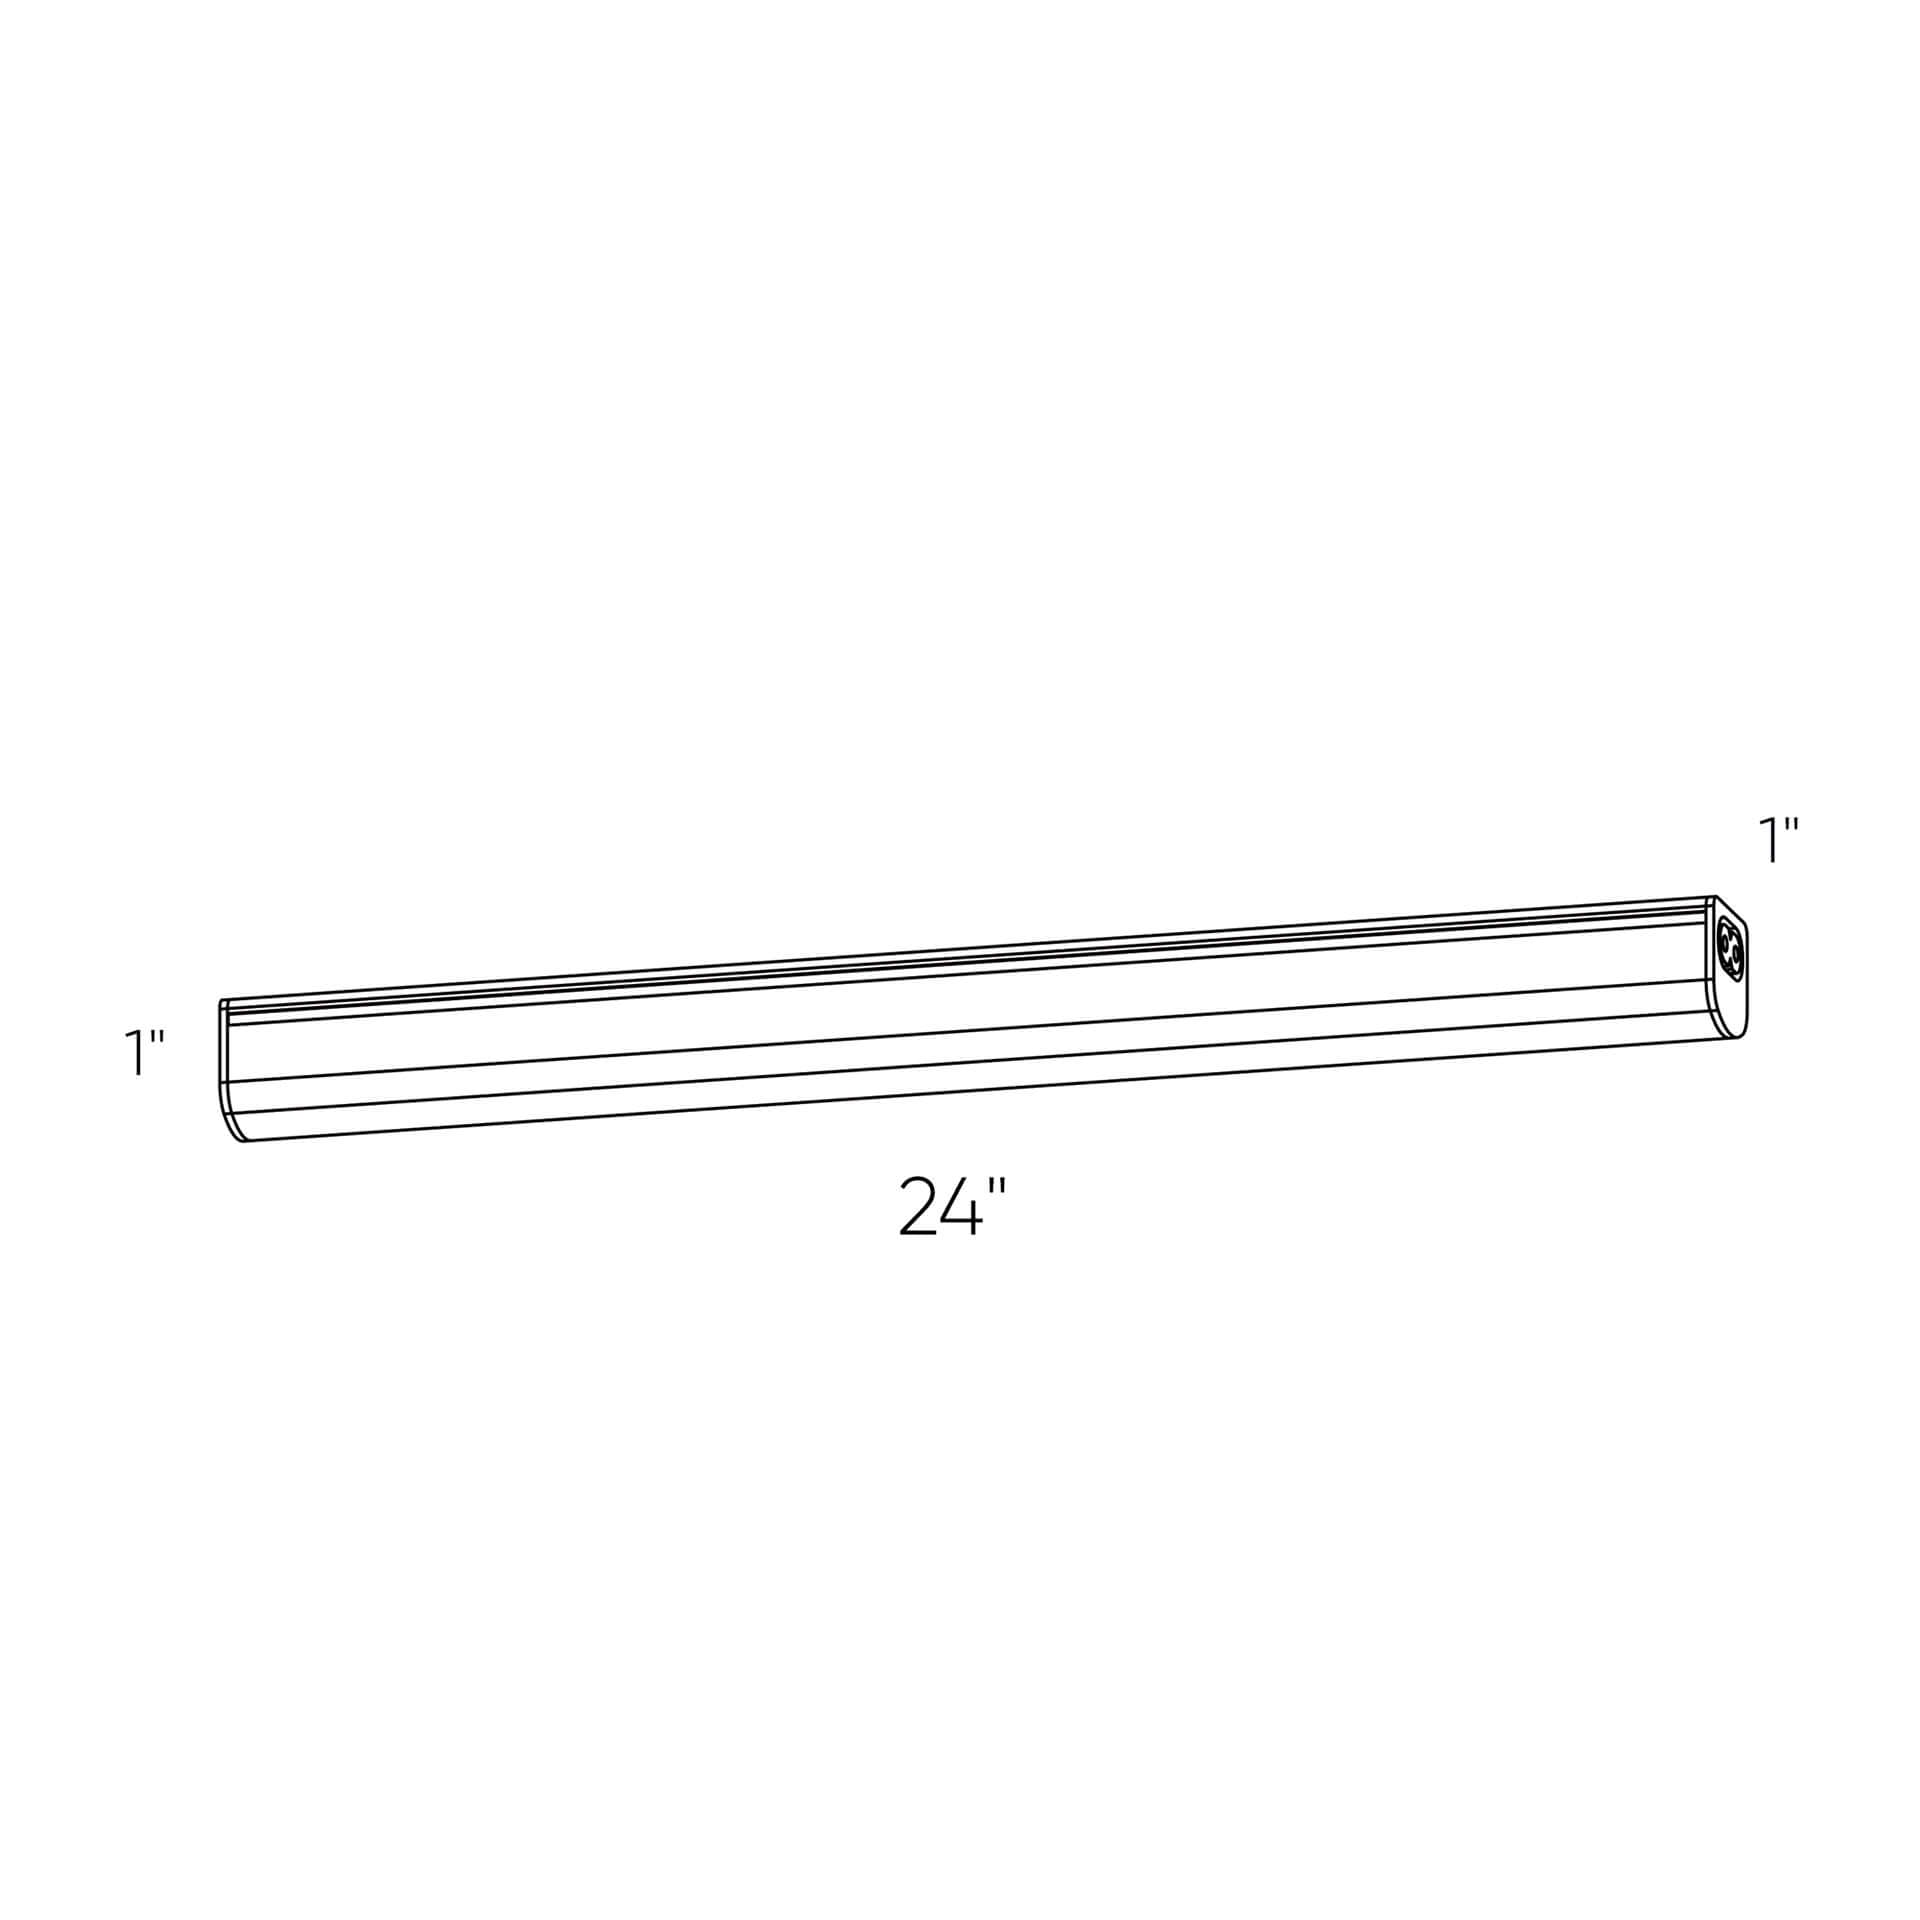 Cct Powerled Linear Under Cabinet Light